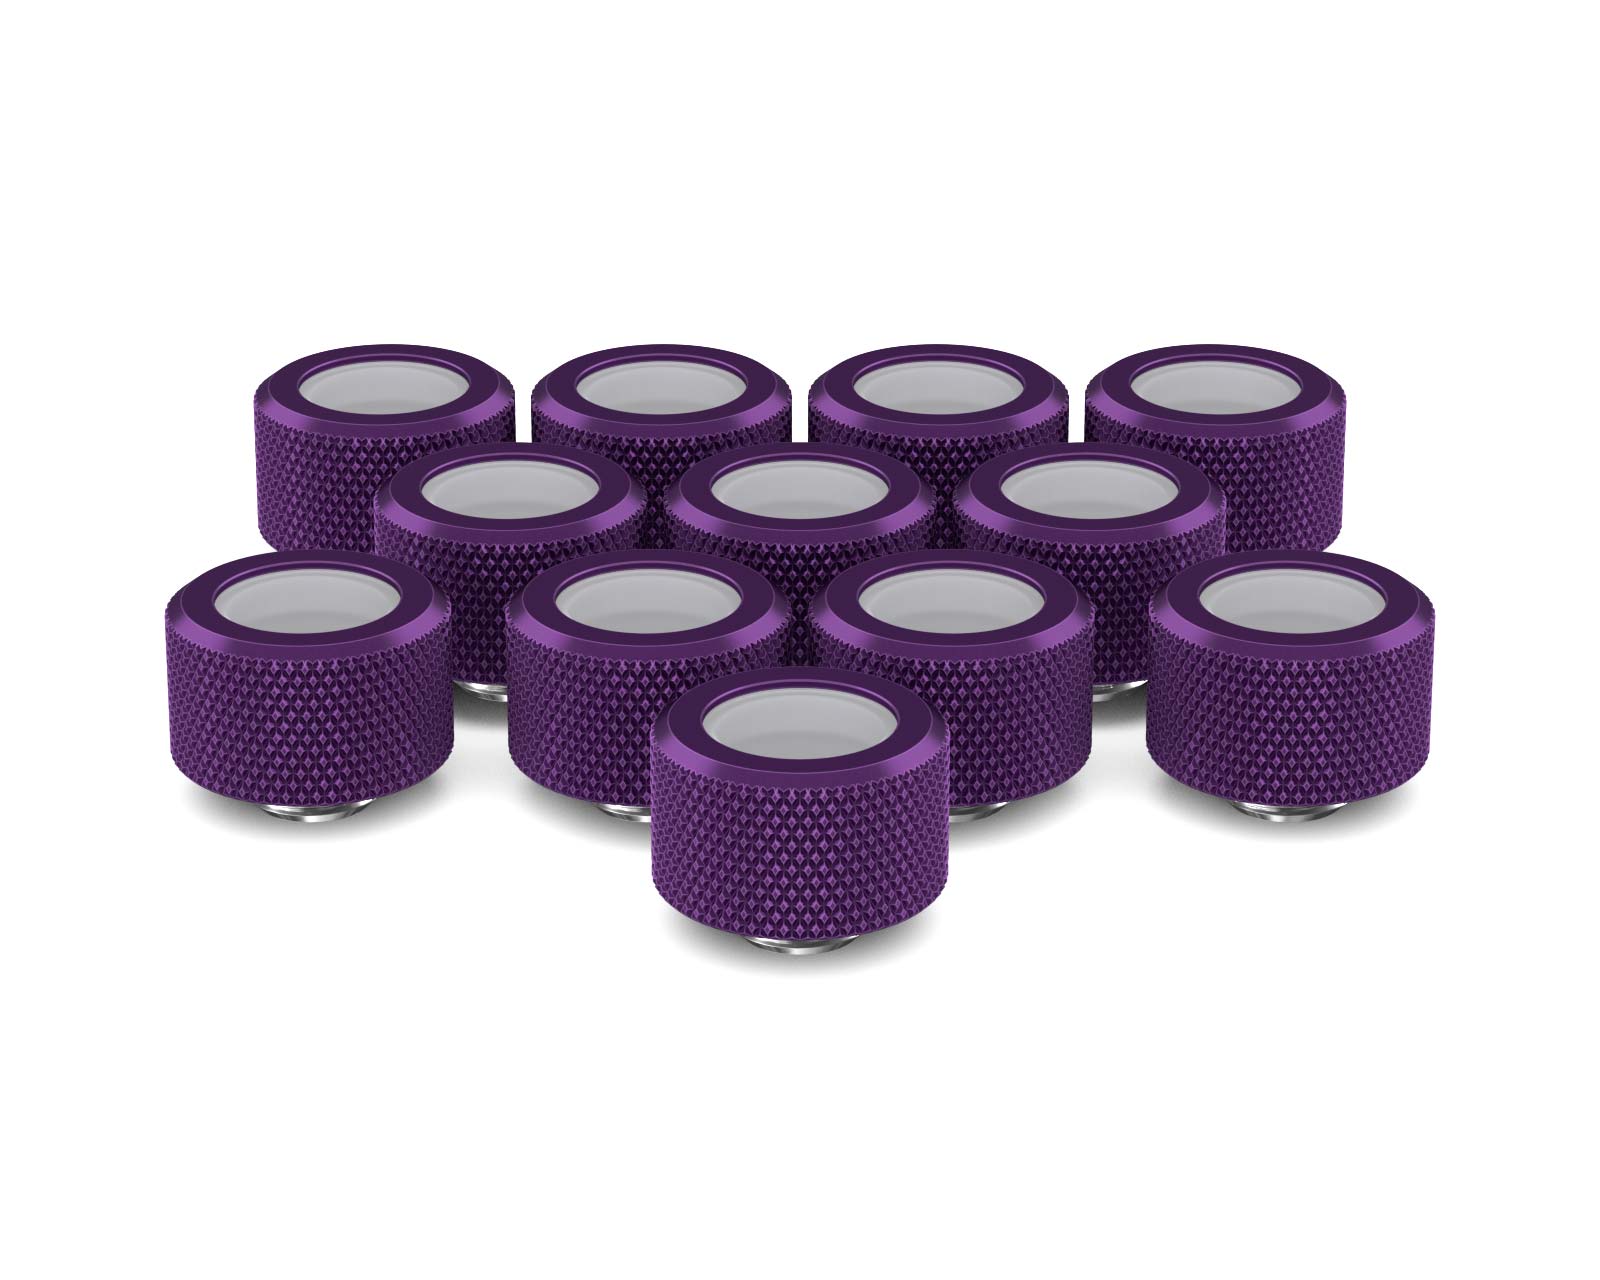 PrimoChill 16mm OD Rigid SX Fitting - 12 Pack - PrimoChill - KEEPING IT COOL Candy Purple